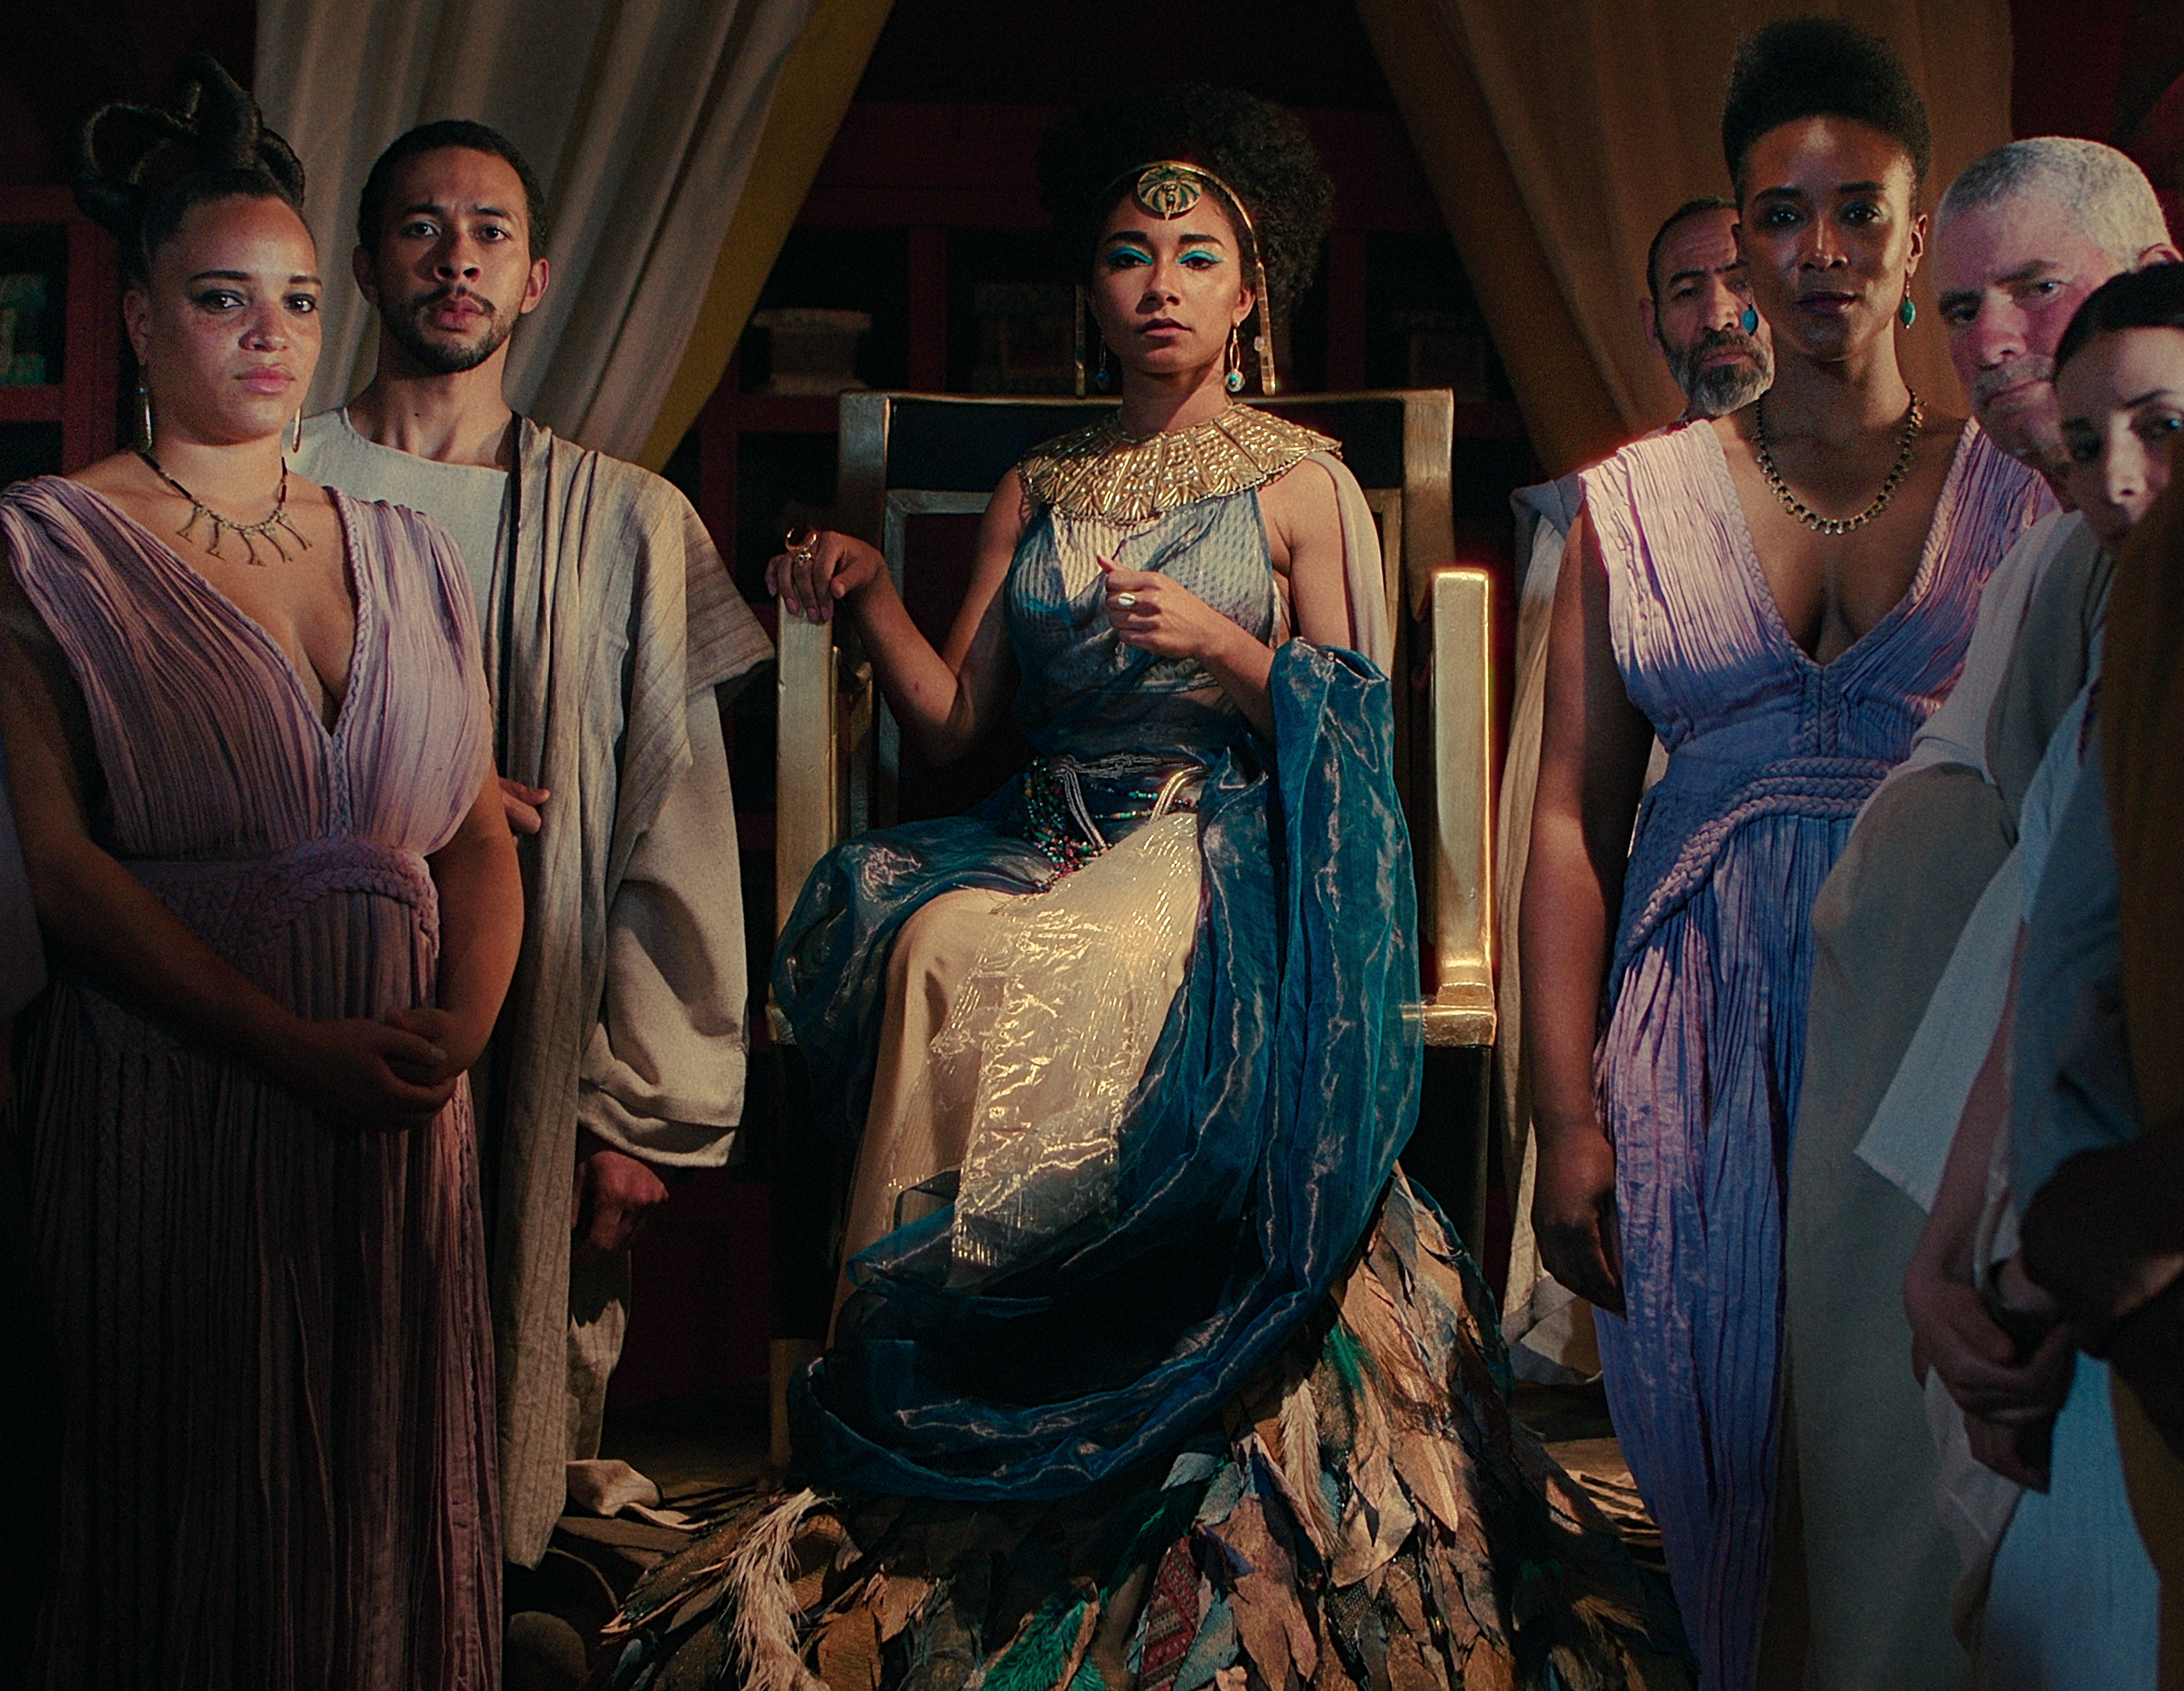 WATCH: Netflix releases The Trailer For 'Queen Cleopatra' From Executive Producer Jada Pinkett Smith